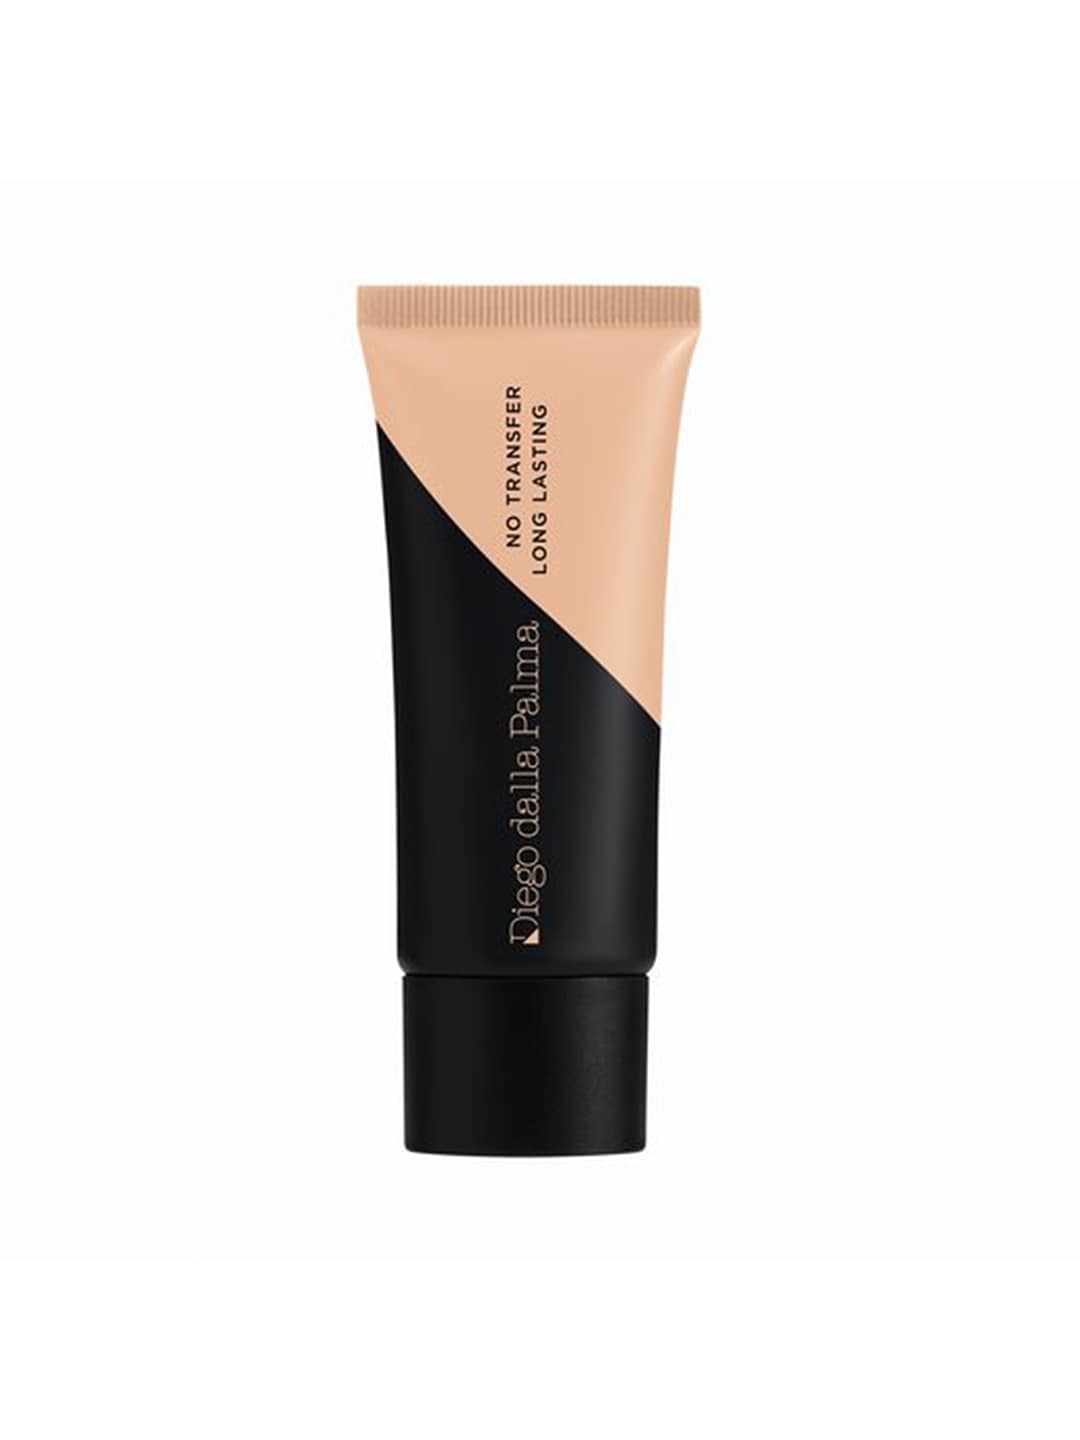 Diego dalla Palma MILANO Stay On Me No Transfer Foundation 30 ml - Neutral Beige 264N Price in India